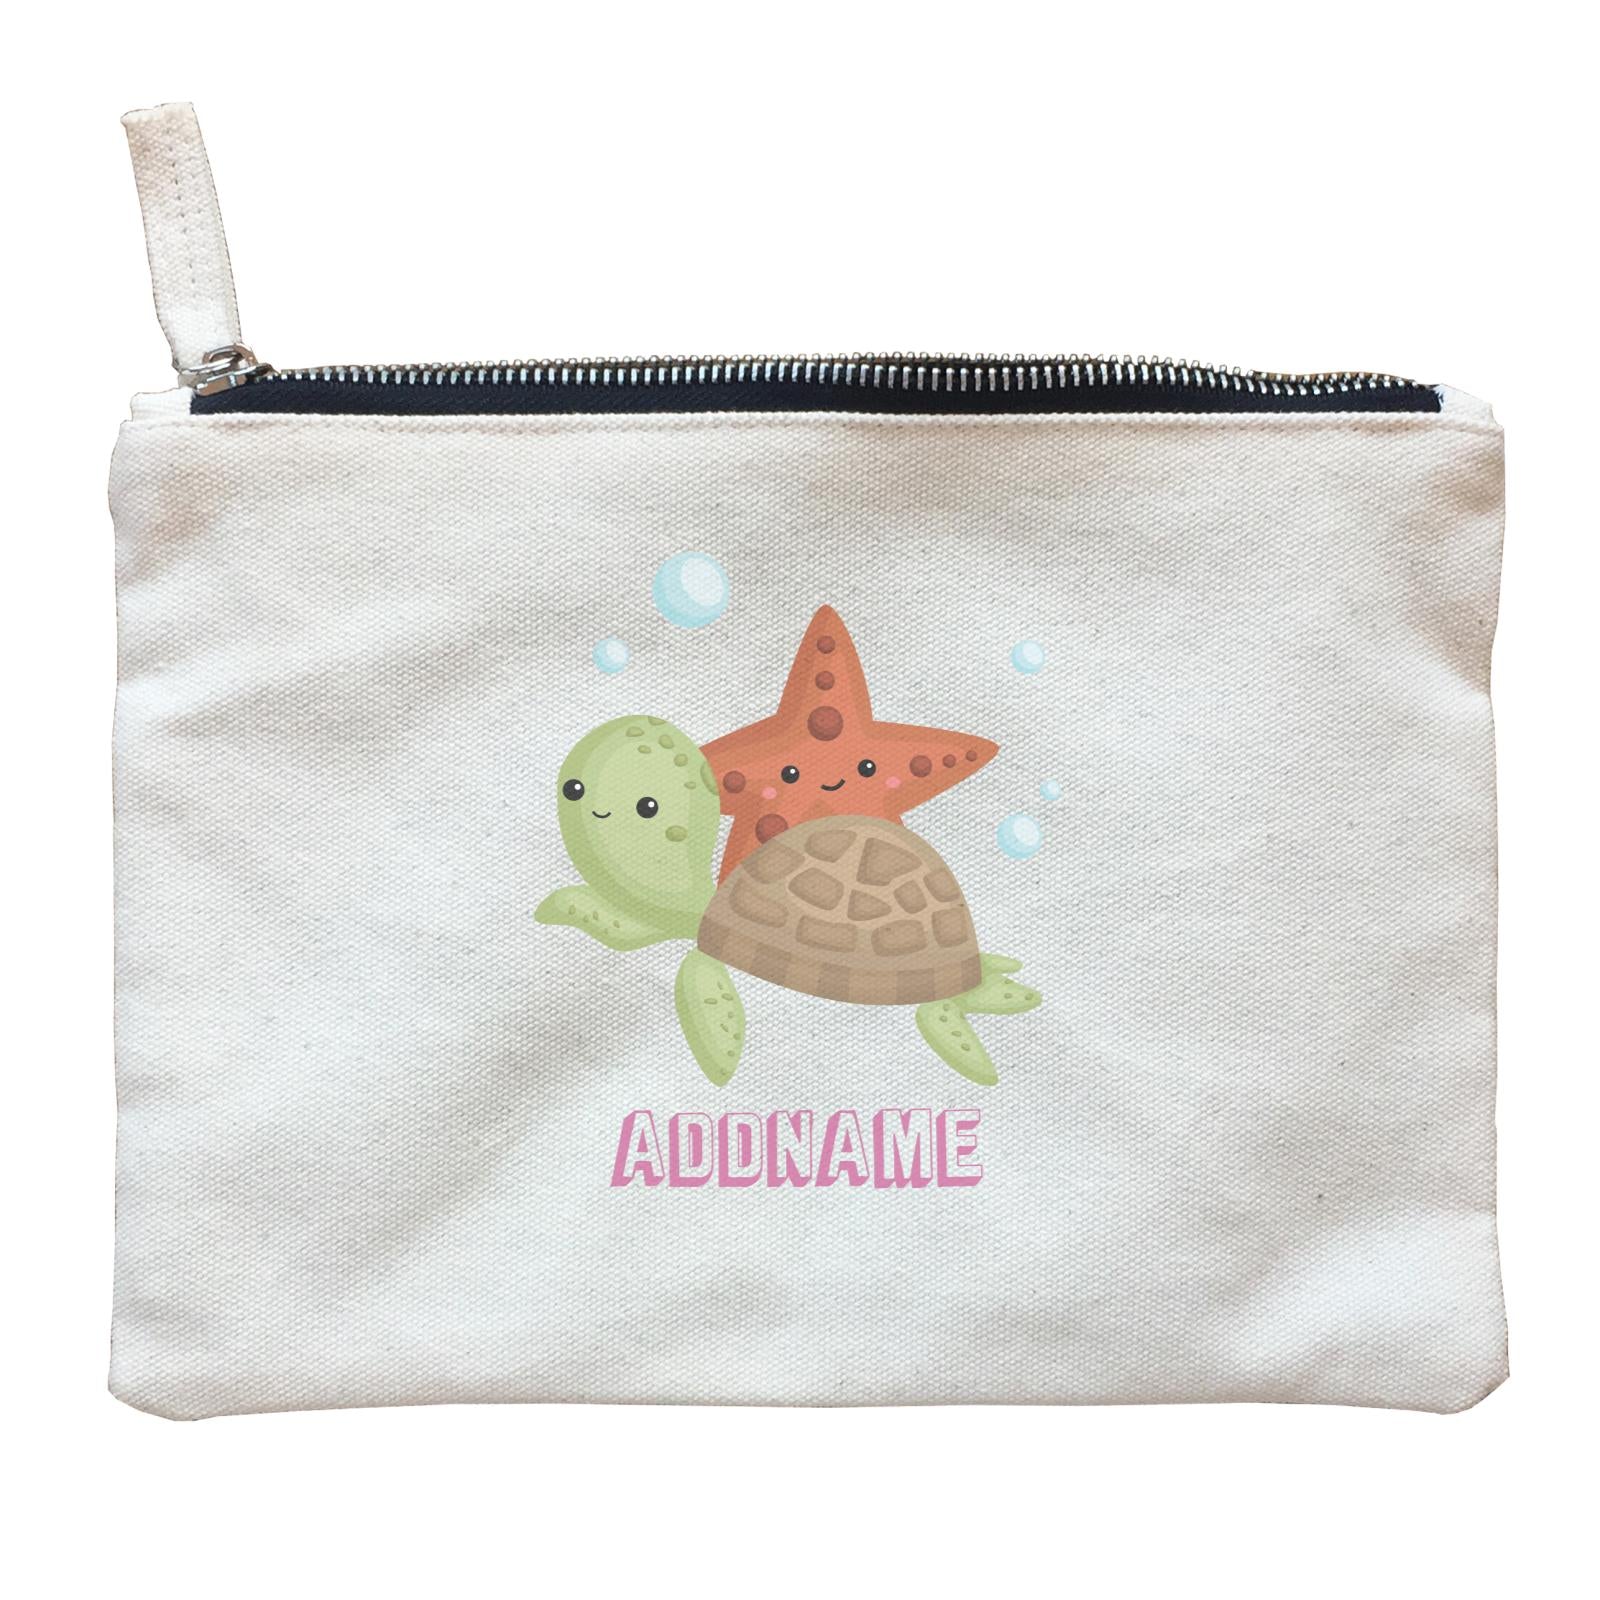 Birthday Mermaid Turtle And Starfish Addname Zipper Pouch